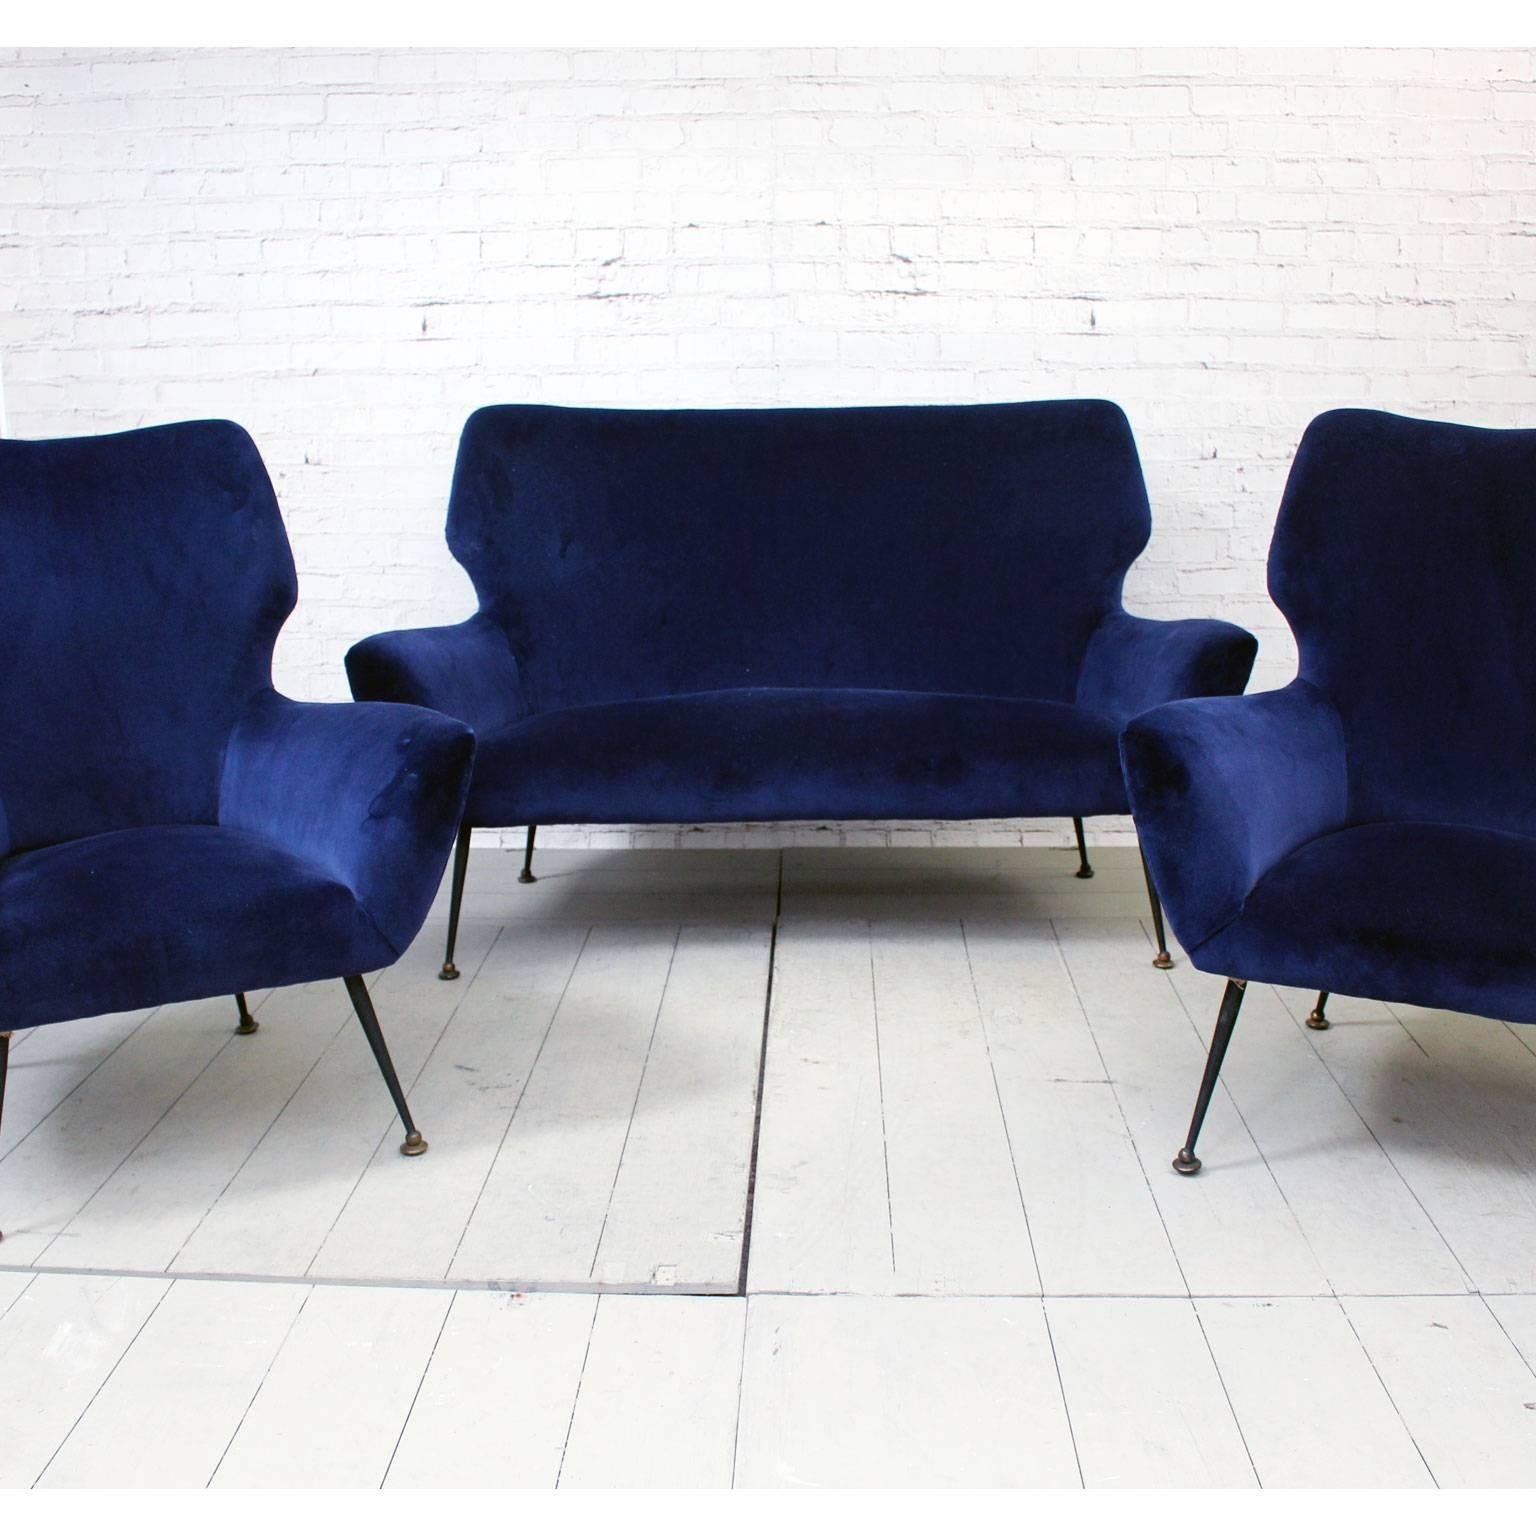 This super stylish pair of Italian armchairs is of the highest quality. We love the design and especially their splayed black legs on brass feet and unusual shape. These chairs were originally part of a suite, we therefore have a matching sofa